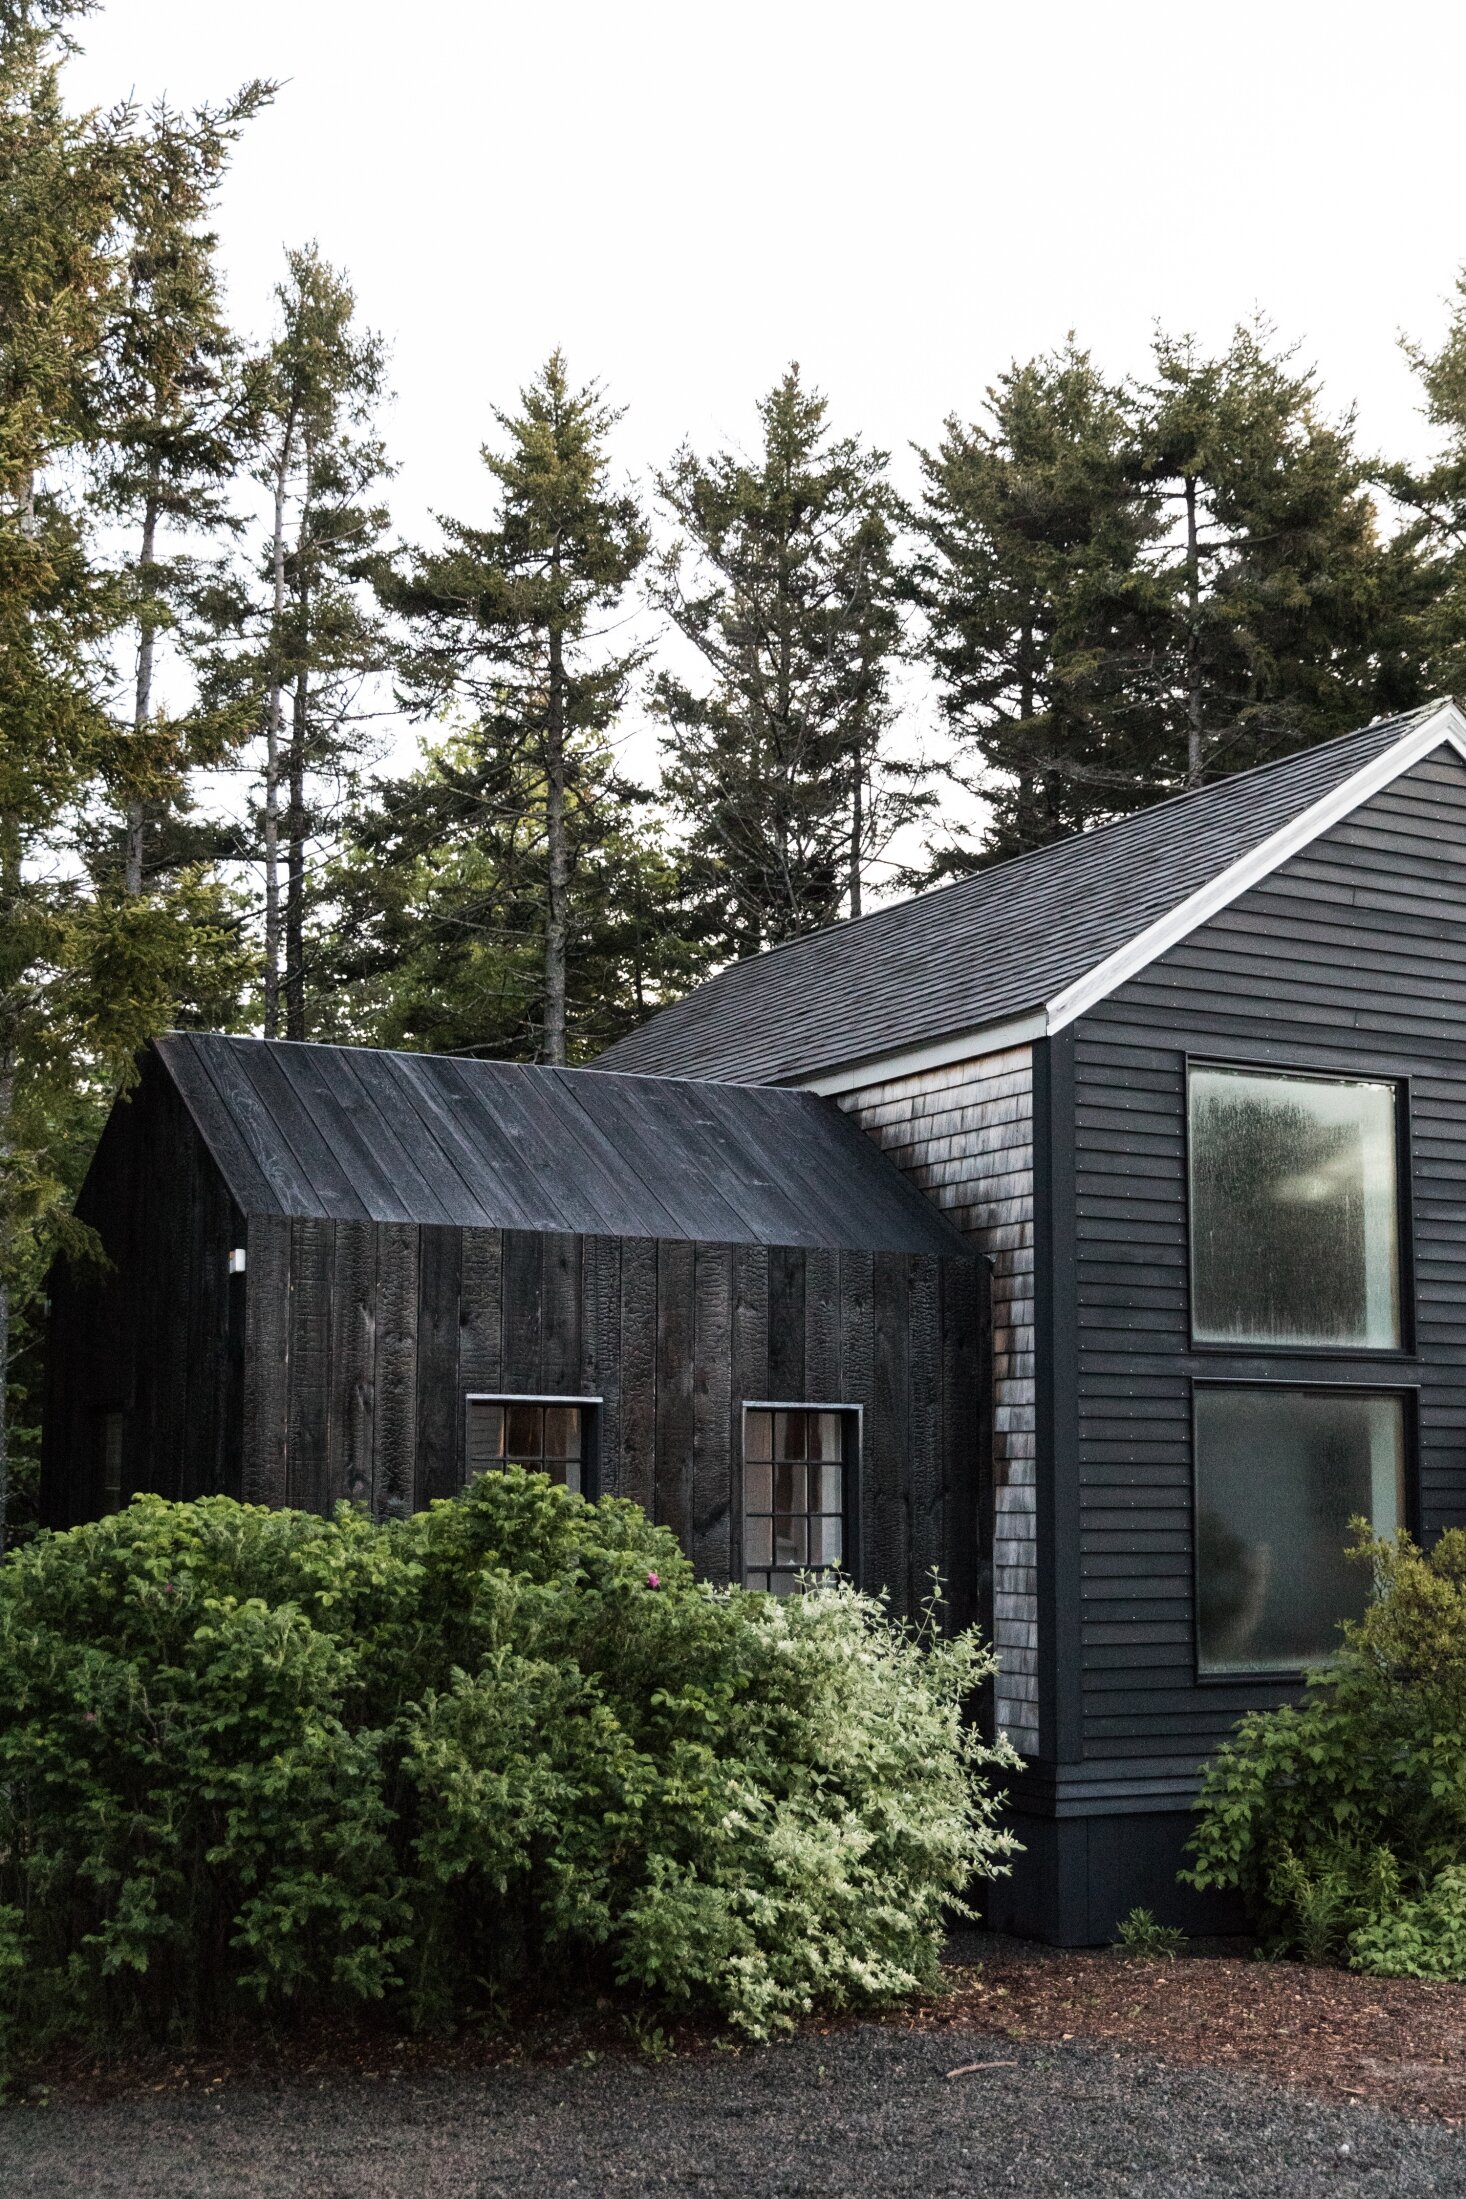 Exterior Update: Siding Inspiration, our game plan, and color scheme ideas - Nadine Stay | Board and batten vertical siding and weathered gray cedar shake shingle siding. | Photo Source: Gardenista